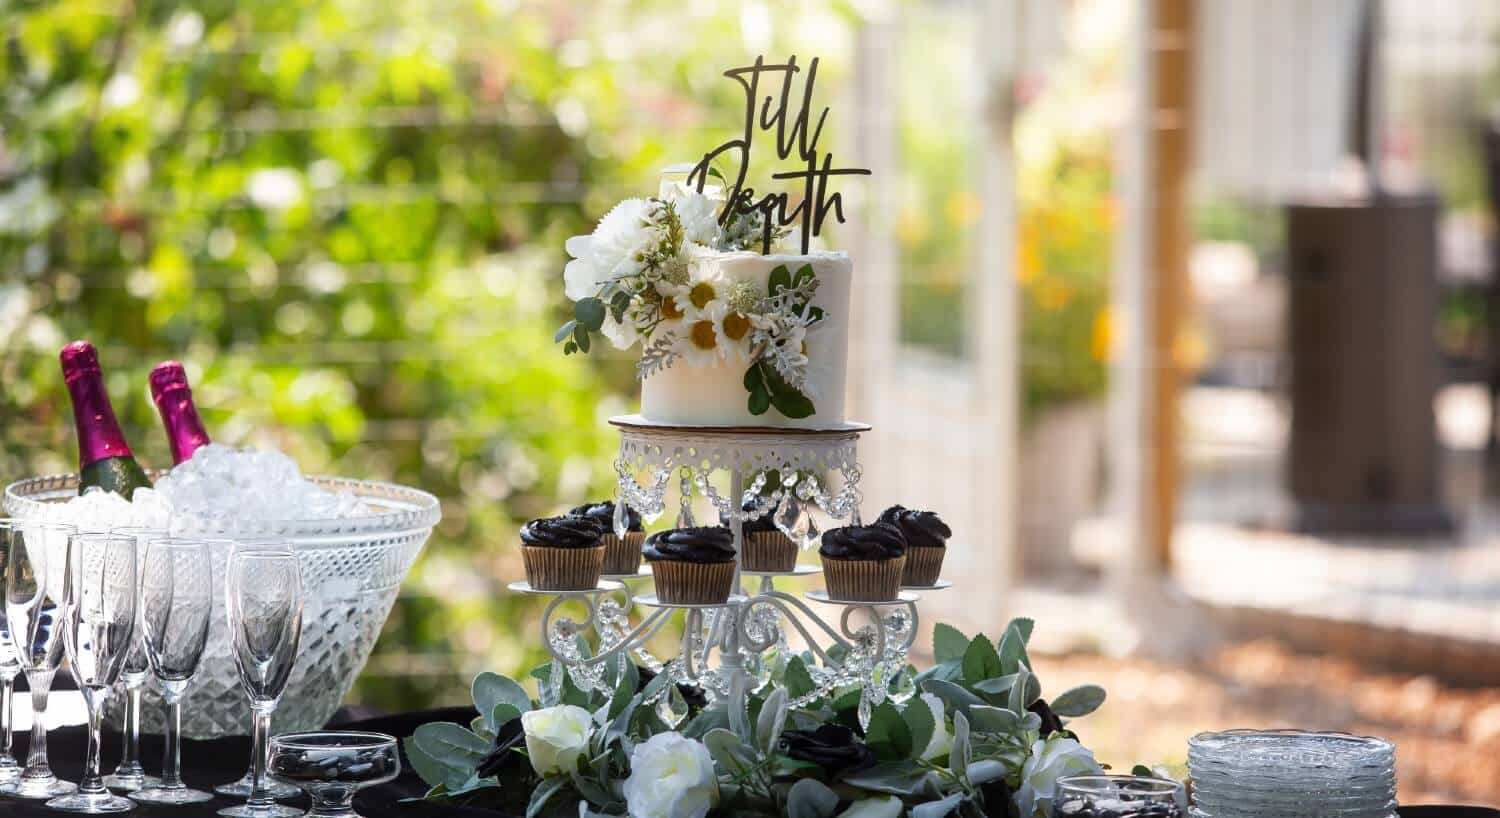 A wedding cake and chocolate cupcakes on a table with two champagne bottles on ice with champagne flutes